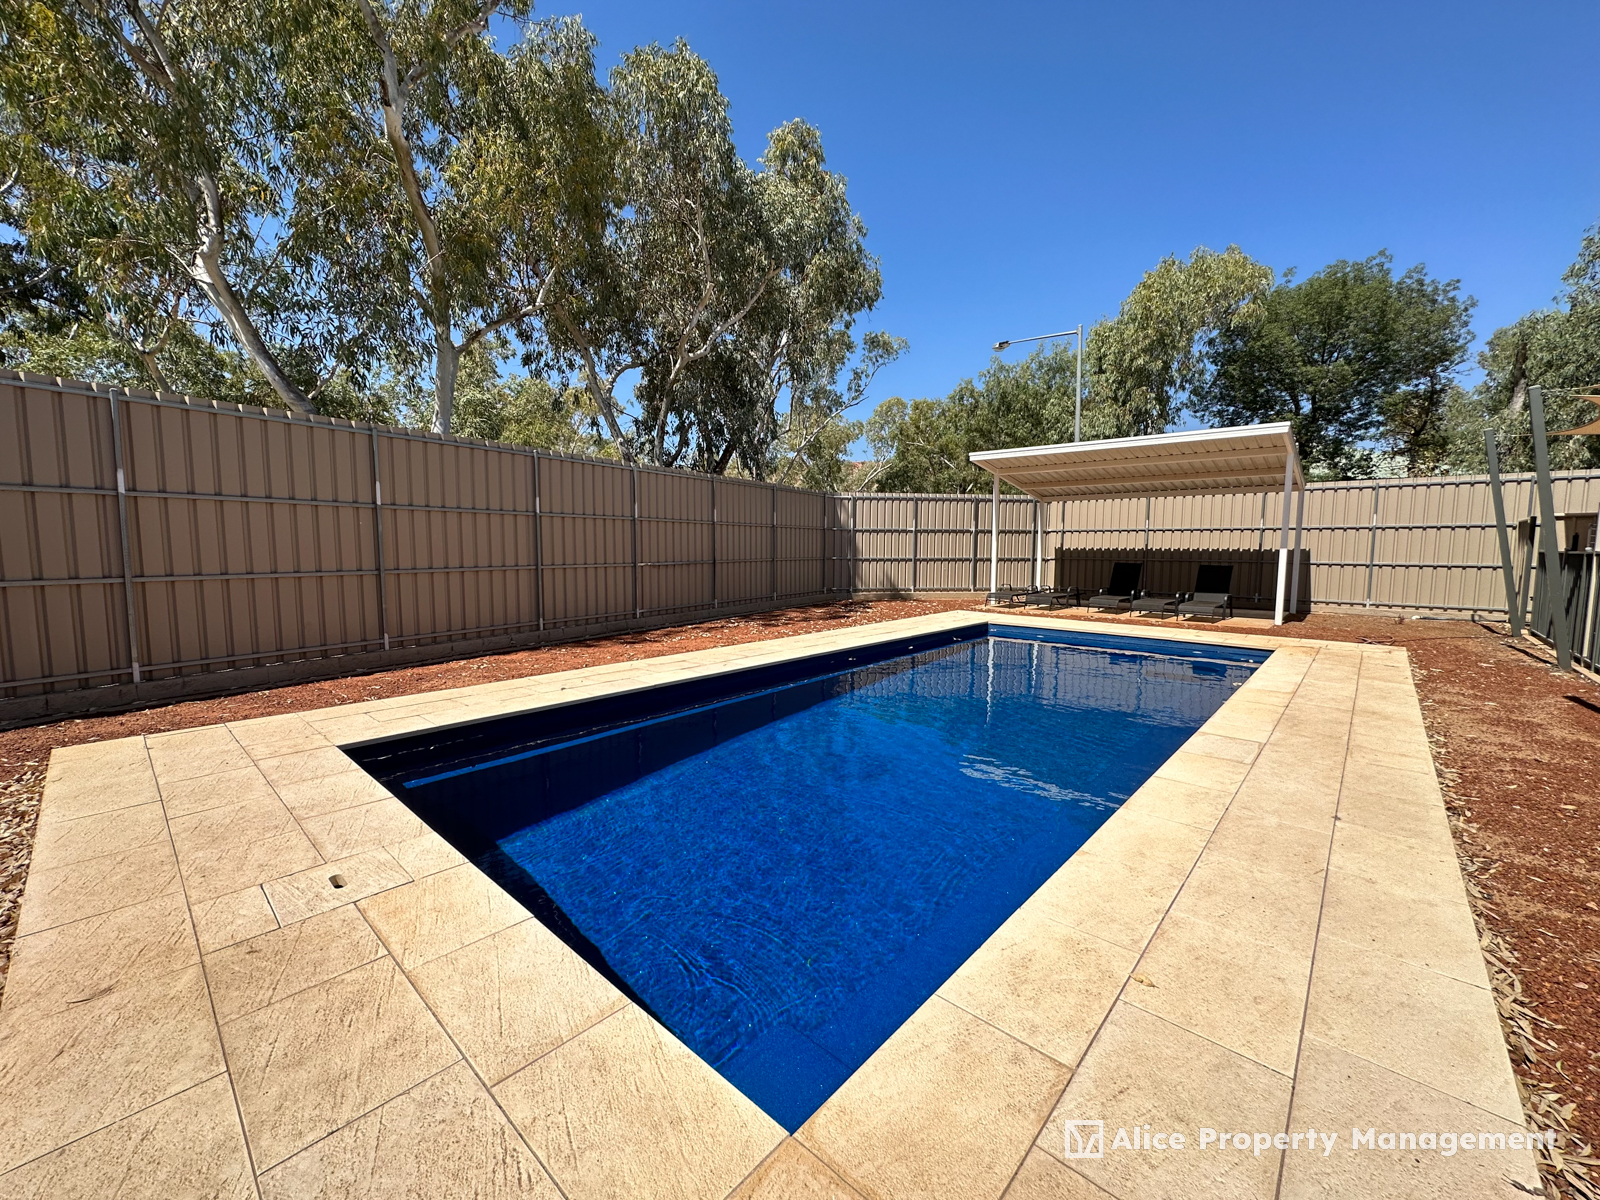 An image of the Red Gums complex pool.